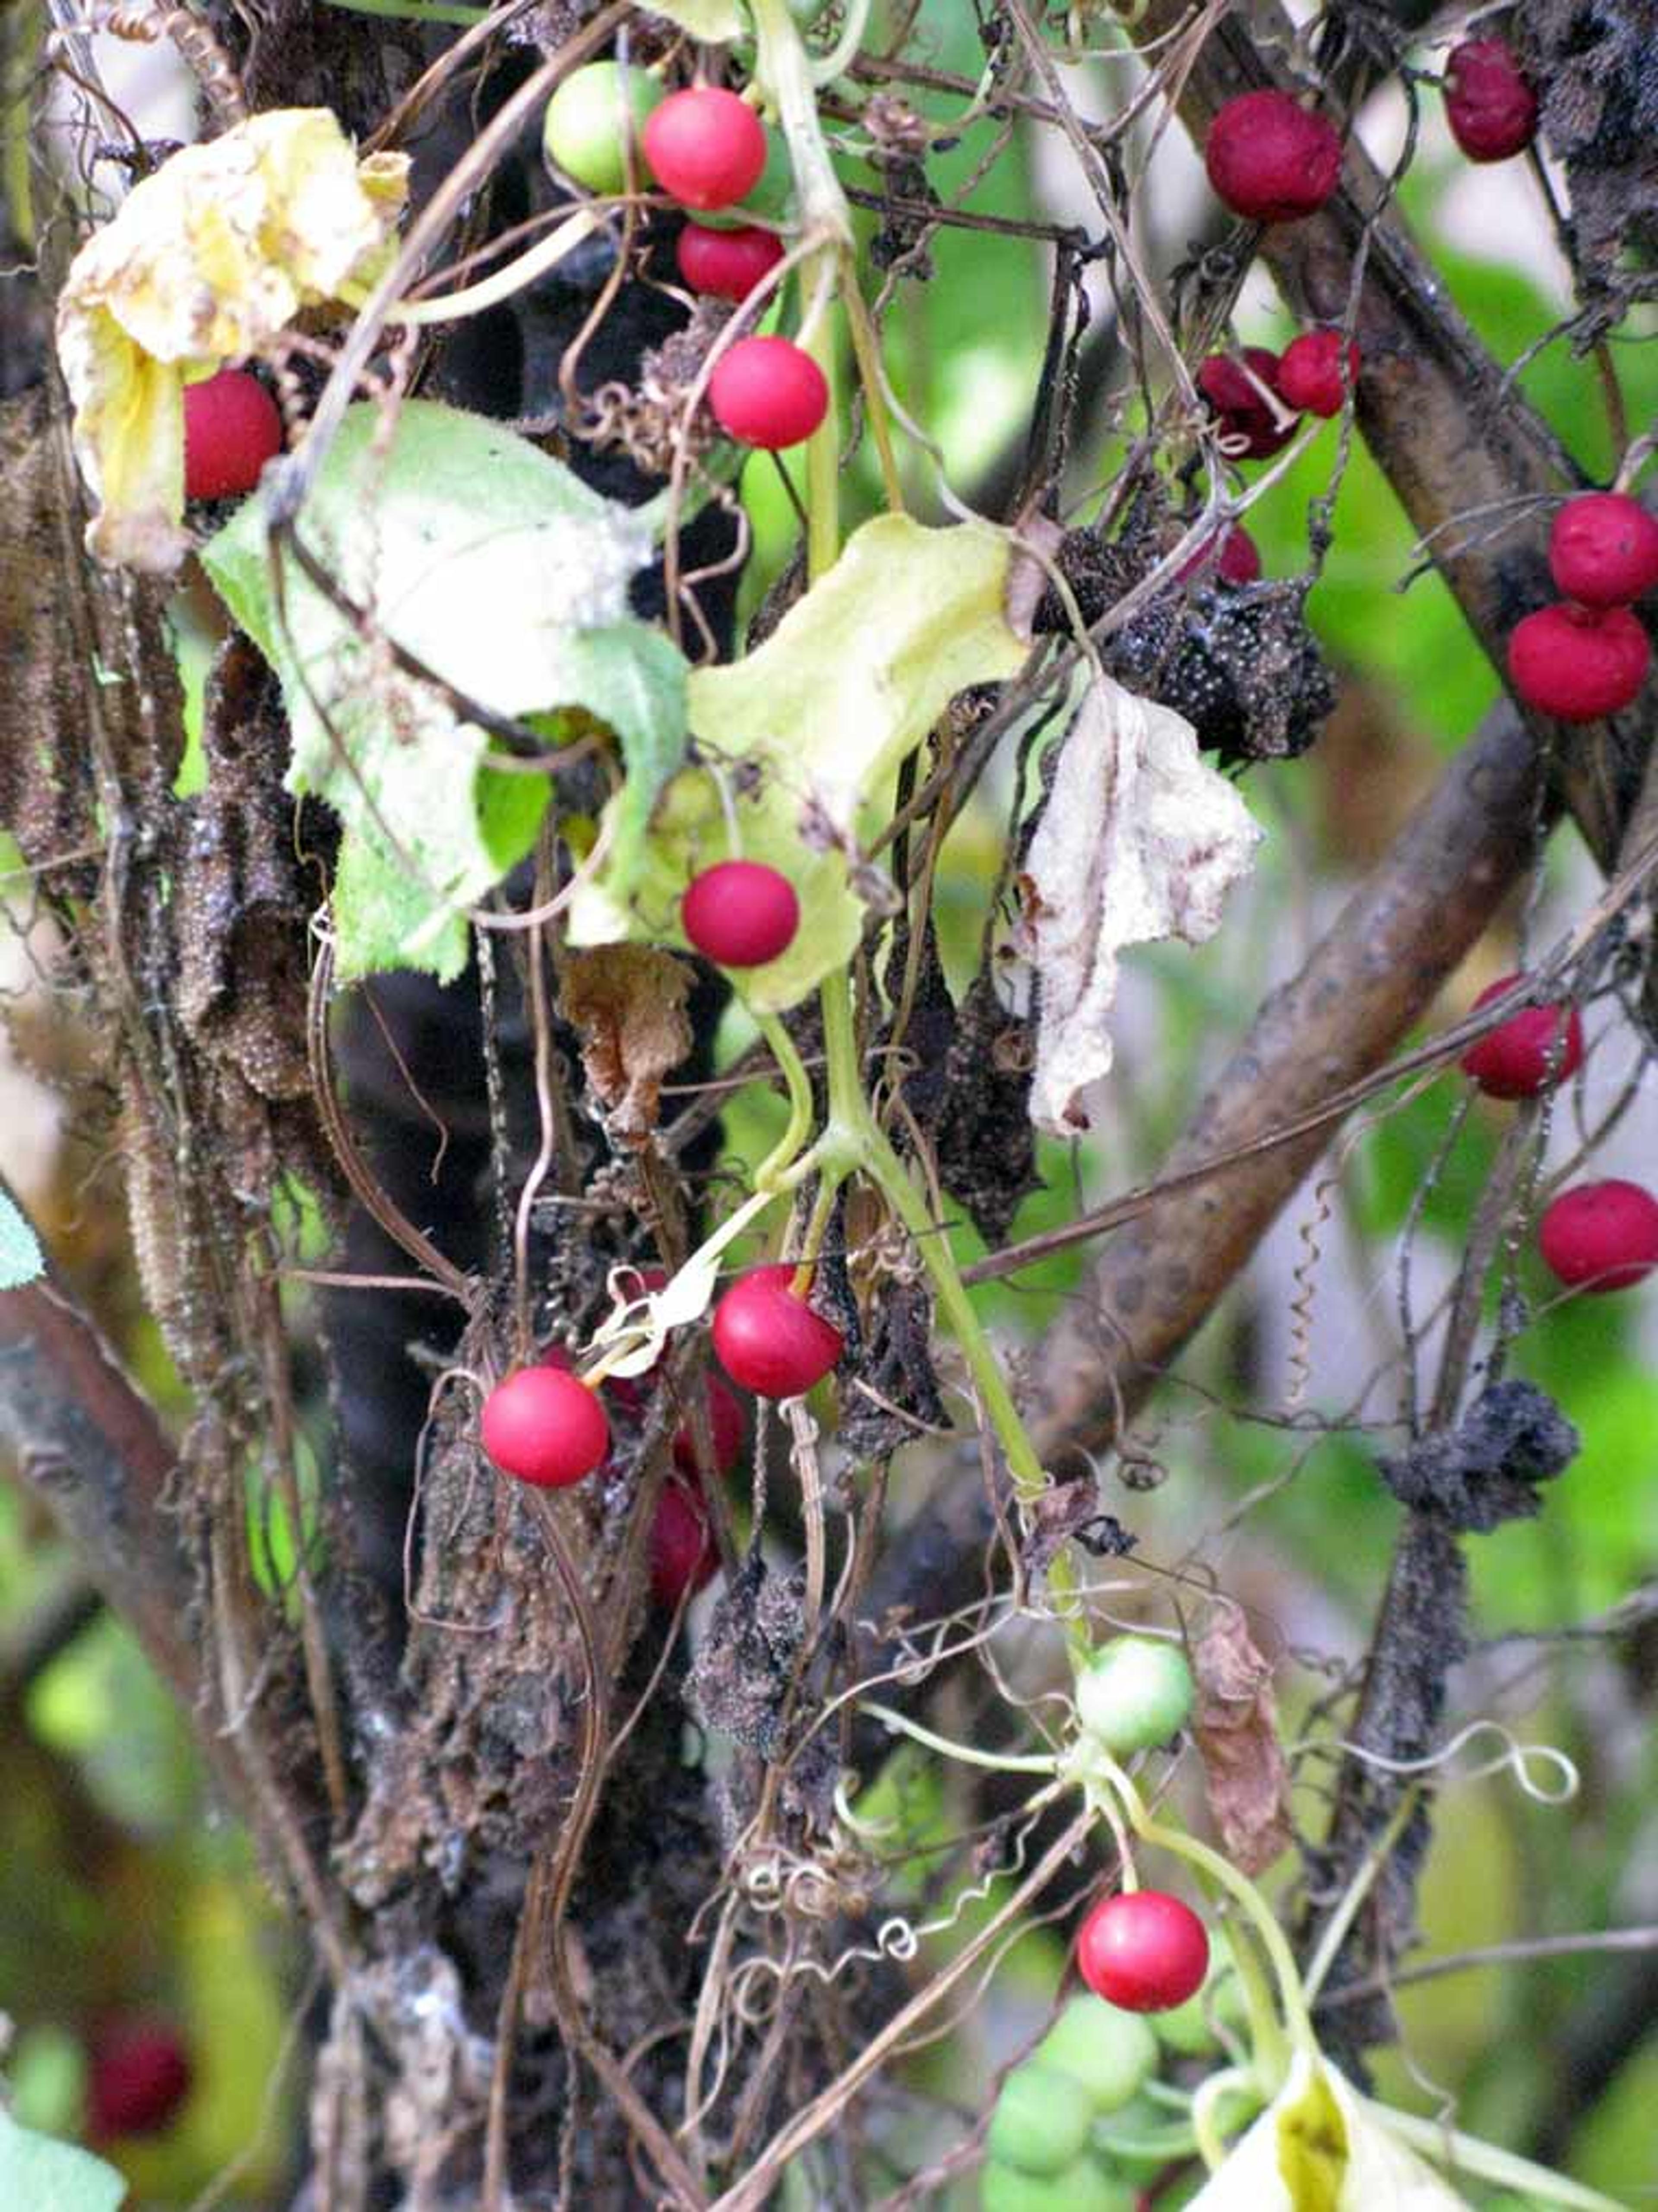 Close-up view of ripe red bryony on the vine